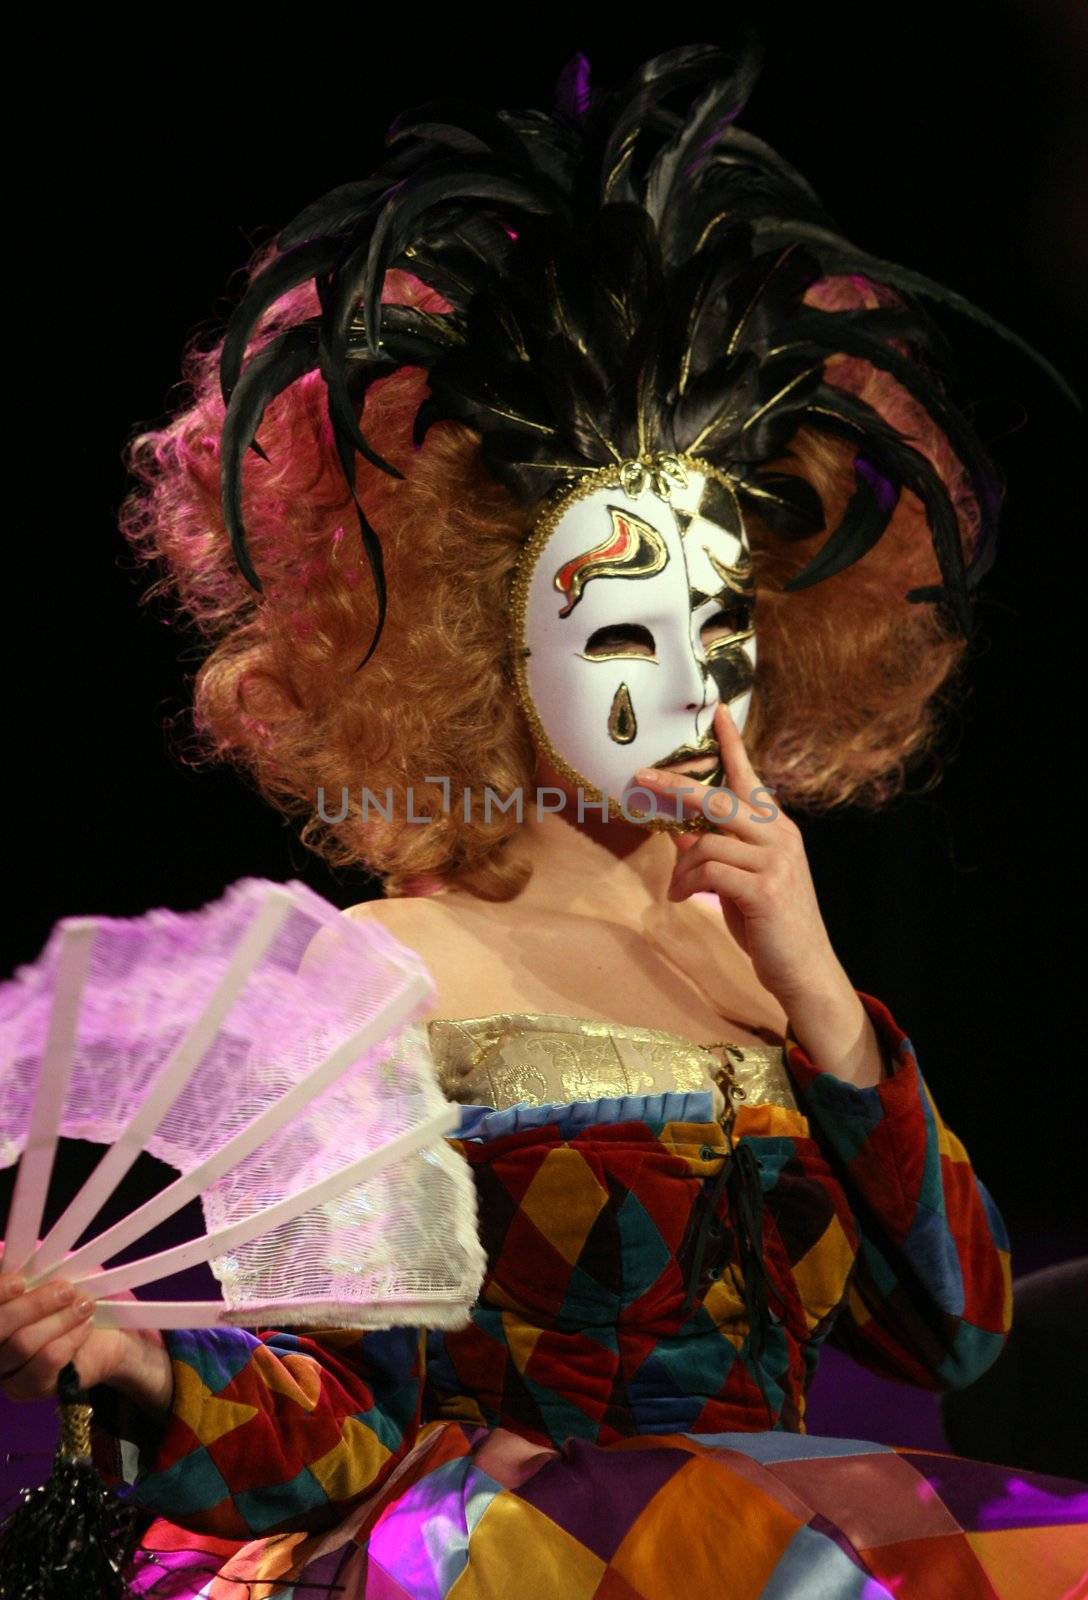 Actress with mask